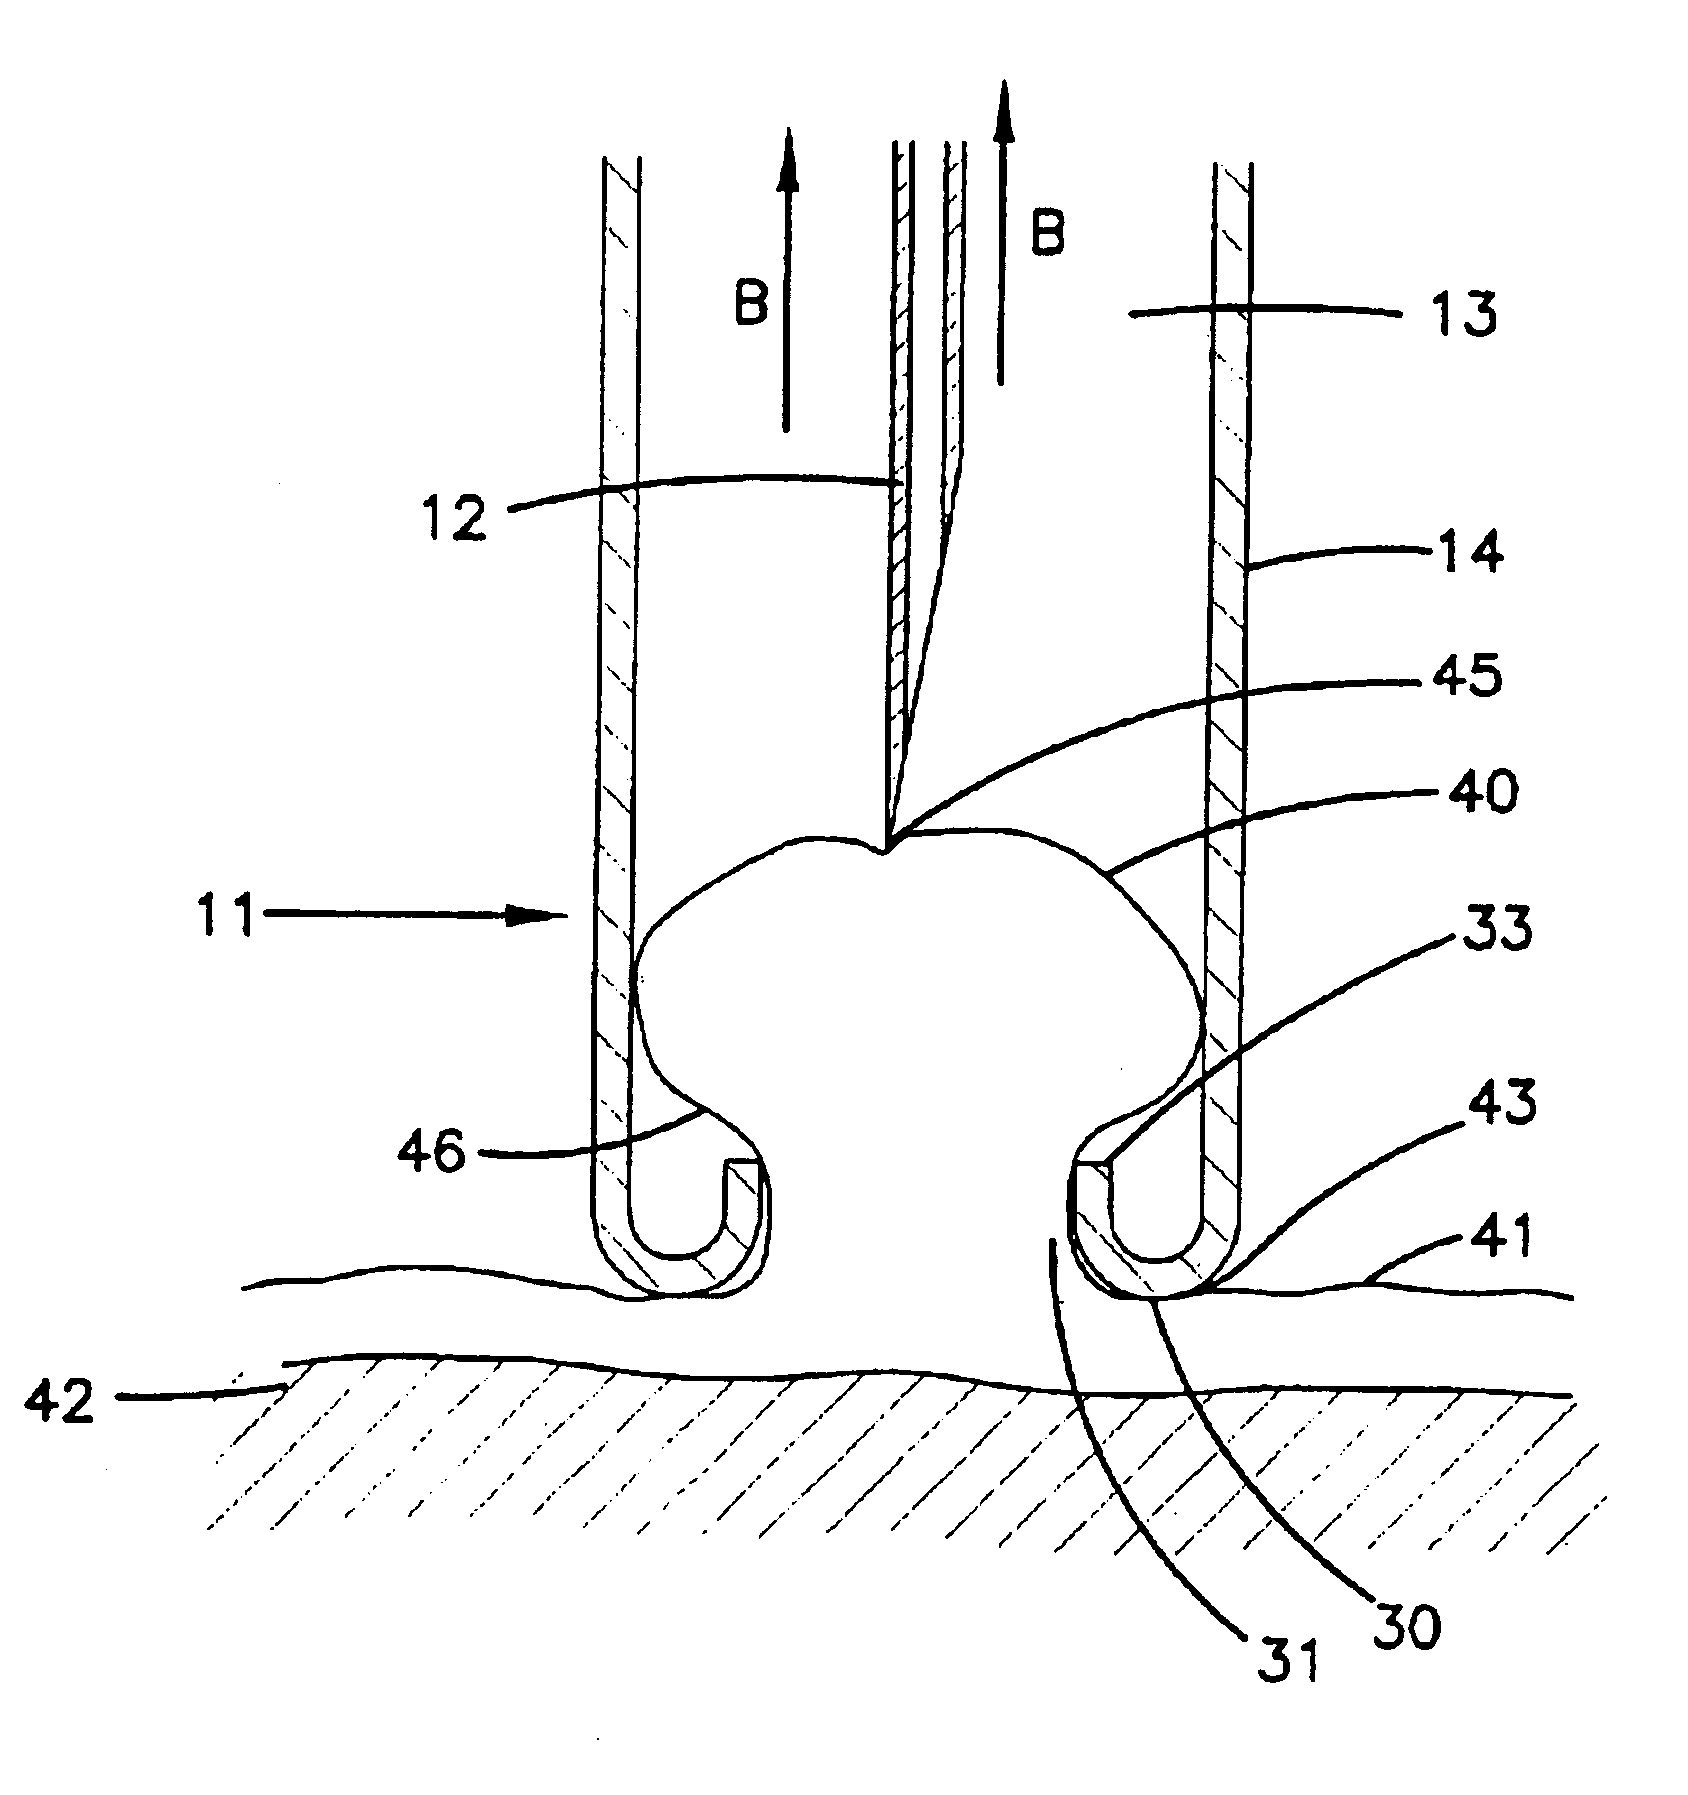 Direct pericardial access device and method